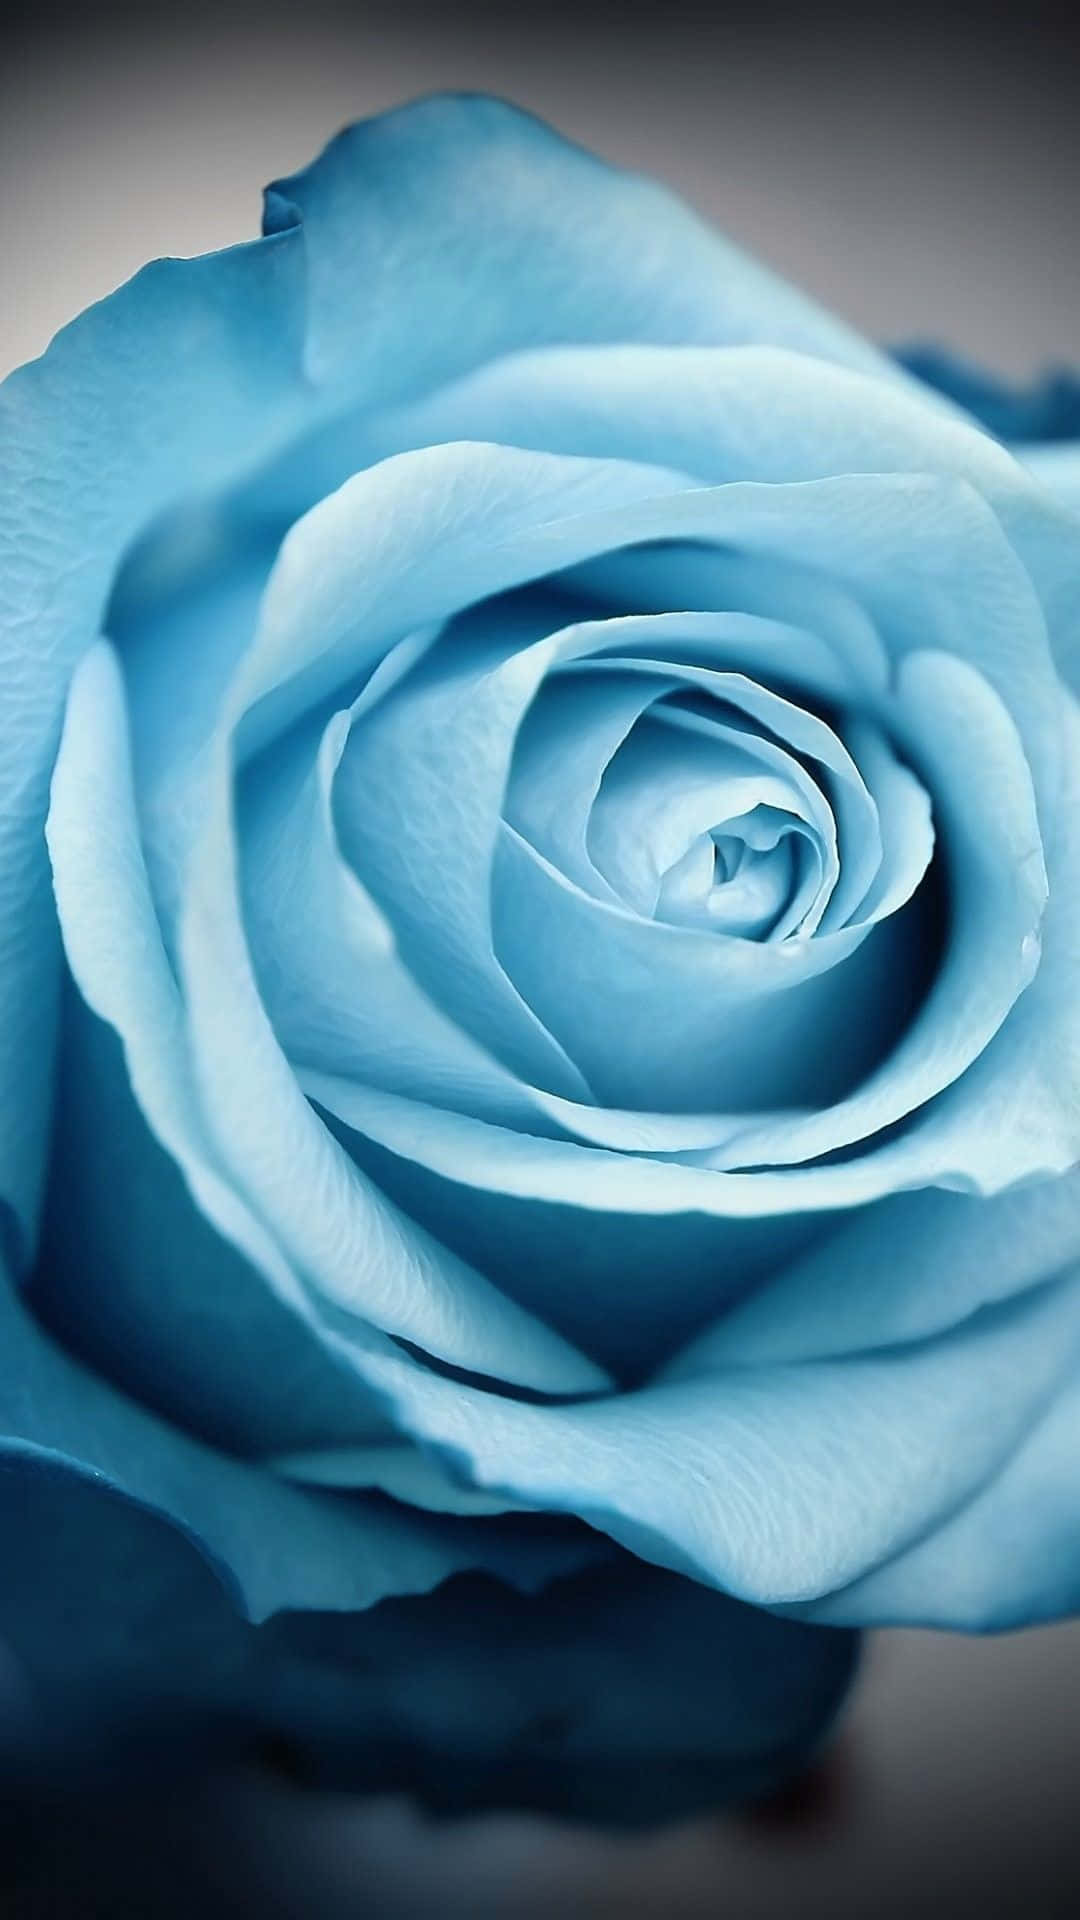 A Blue Rose Is Shown Against A Black Background